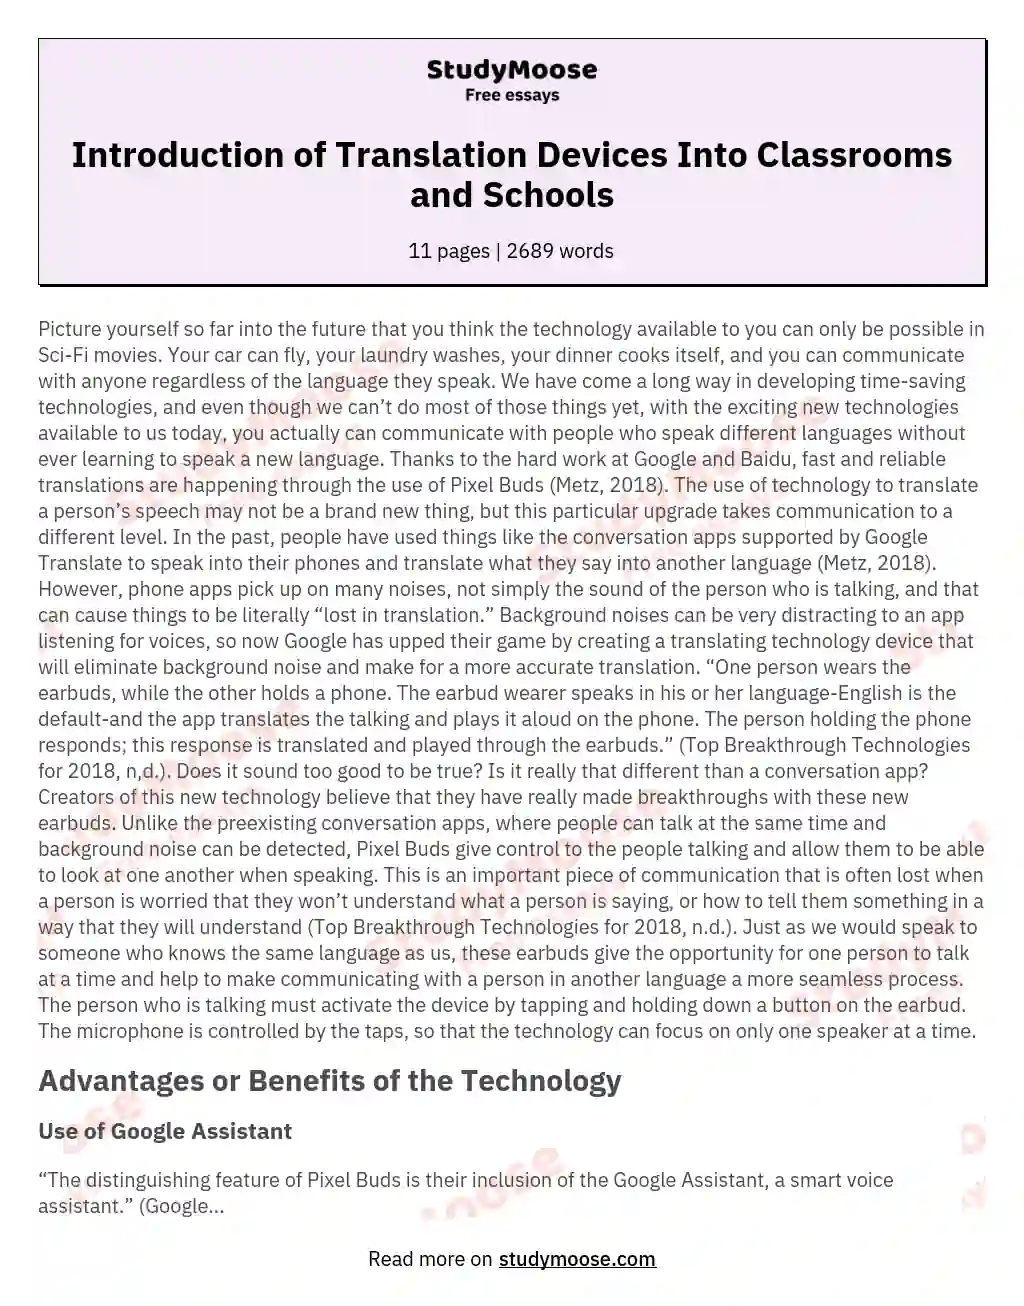 Introduction of Translation Devices Into Classrooms and Schools essay